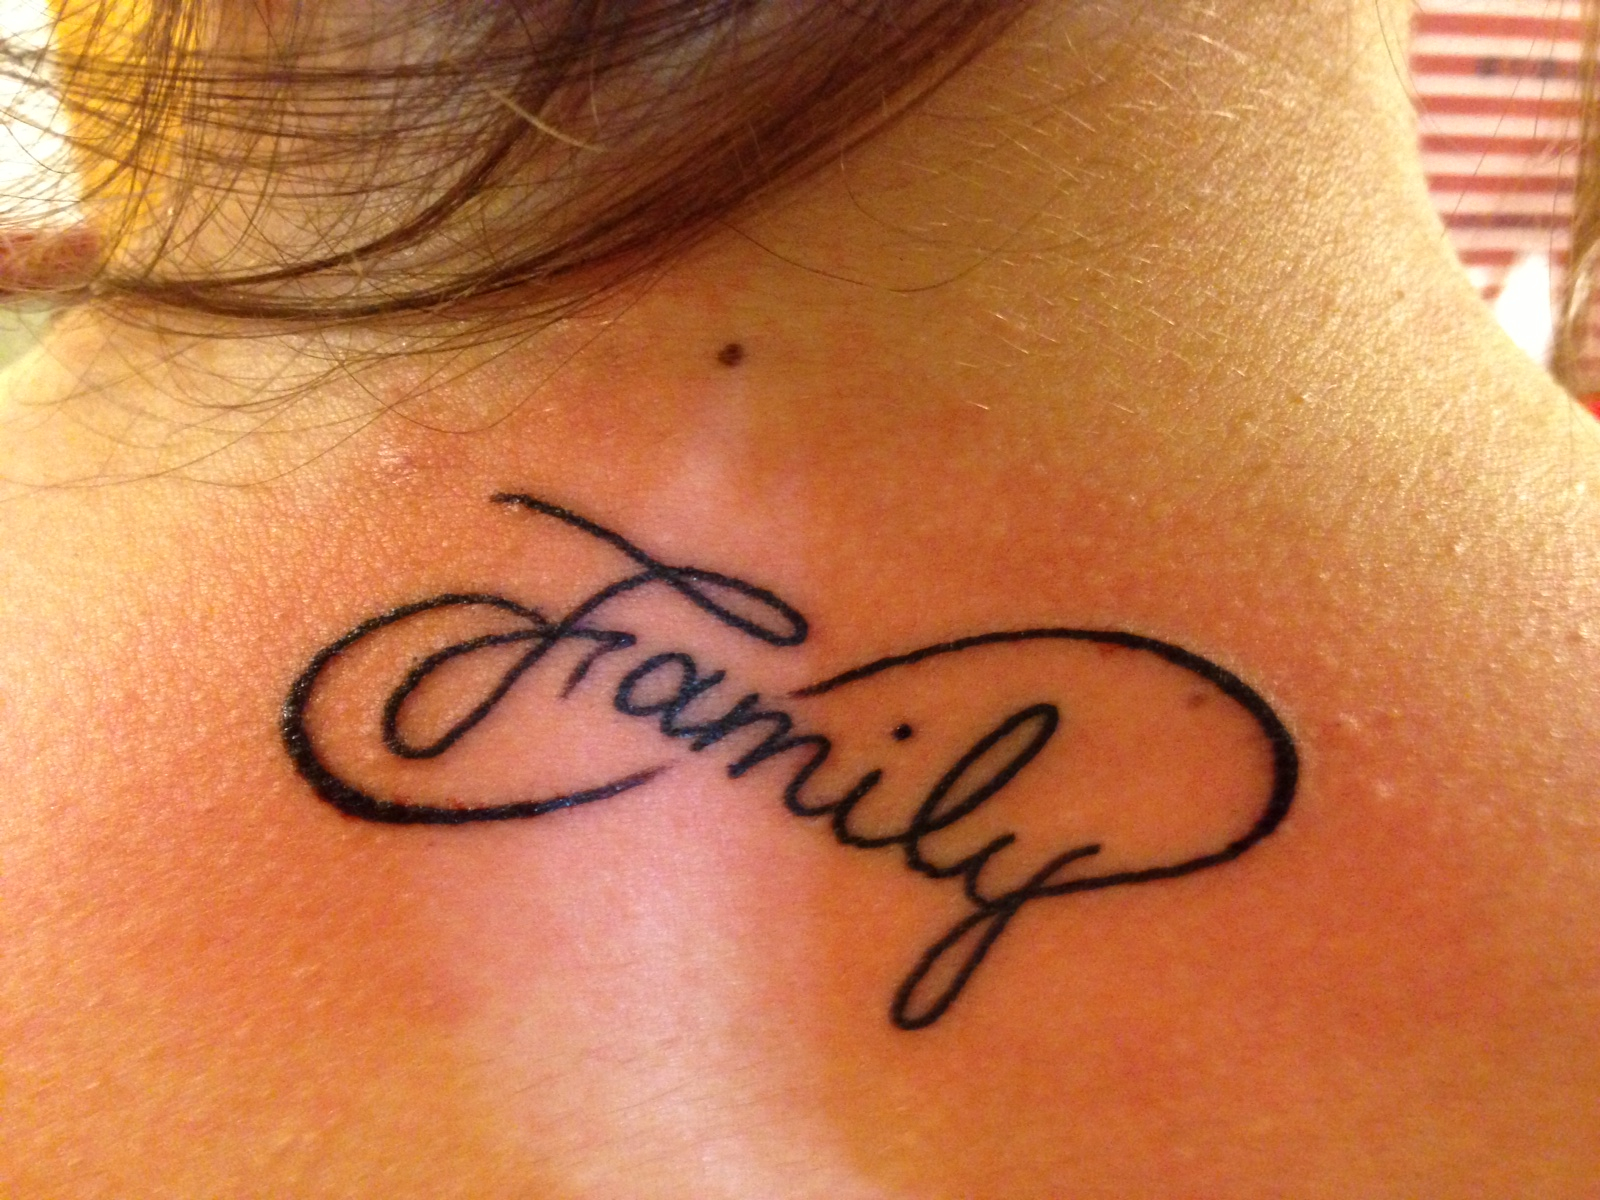 Family Tattoos Designs, Ideas and Meaning - Tattoos For You